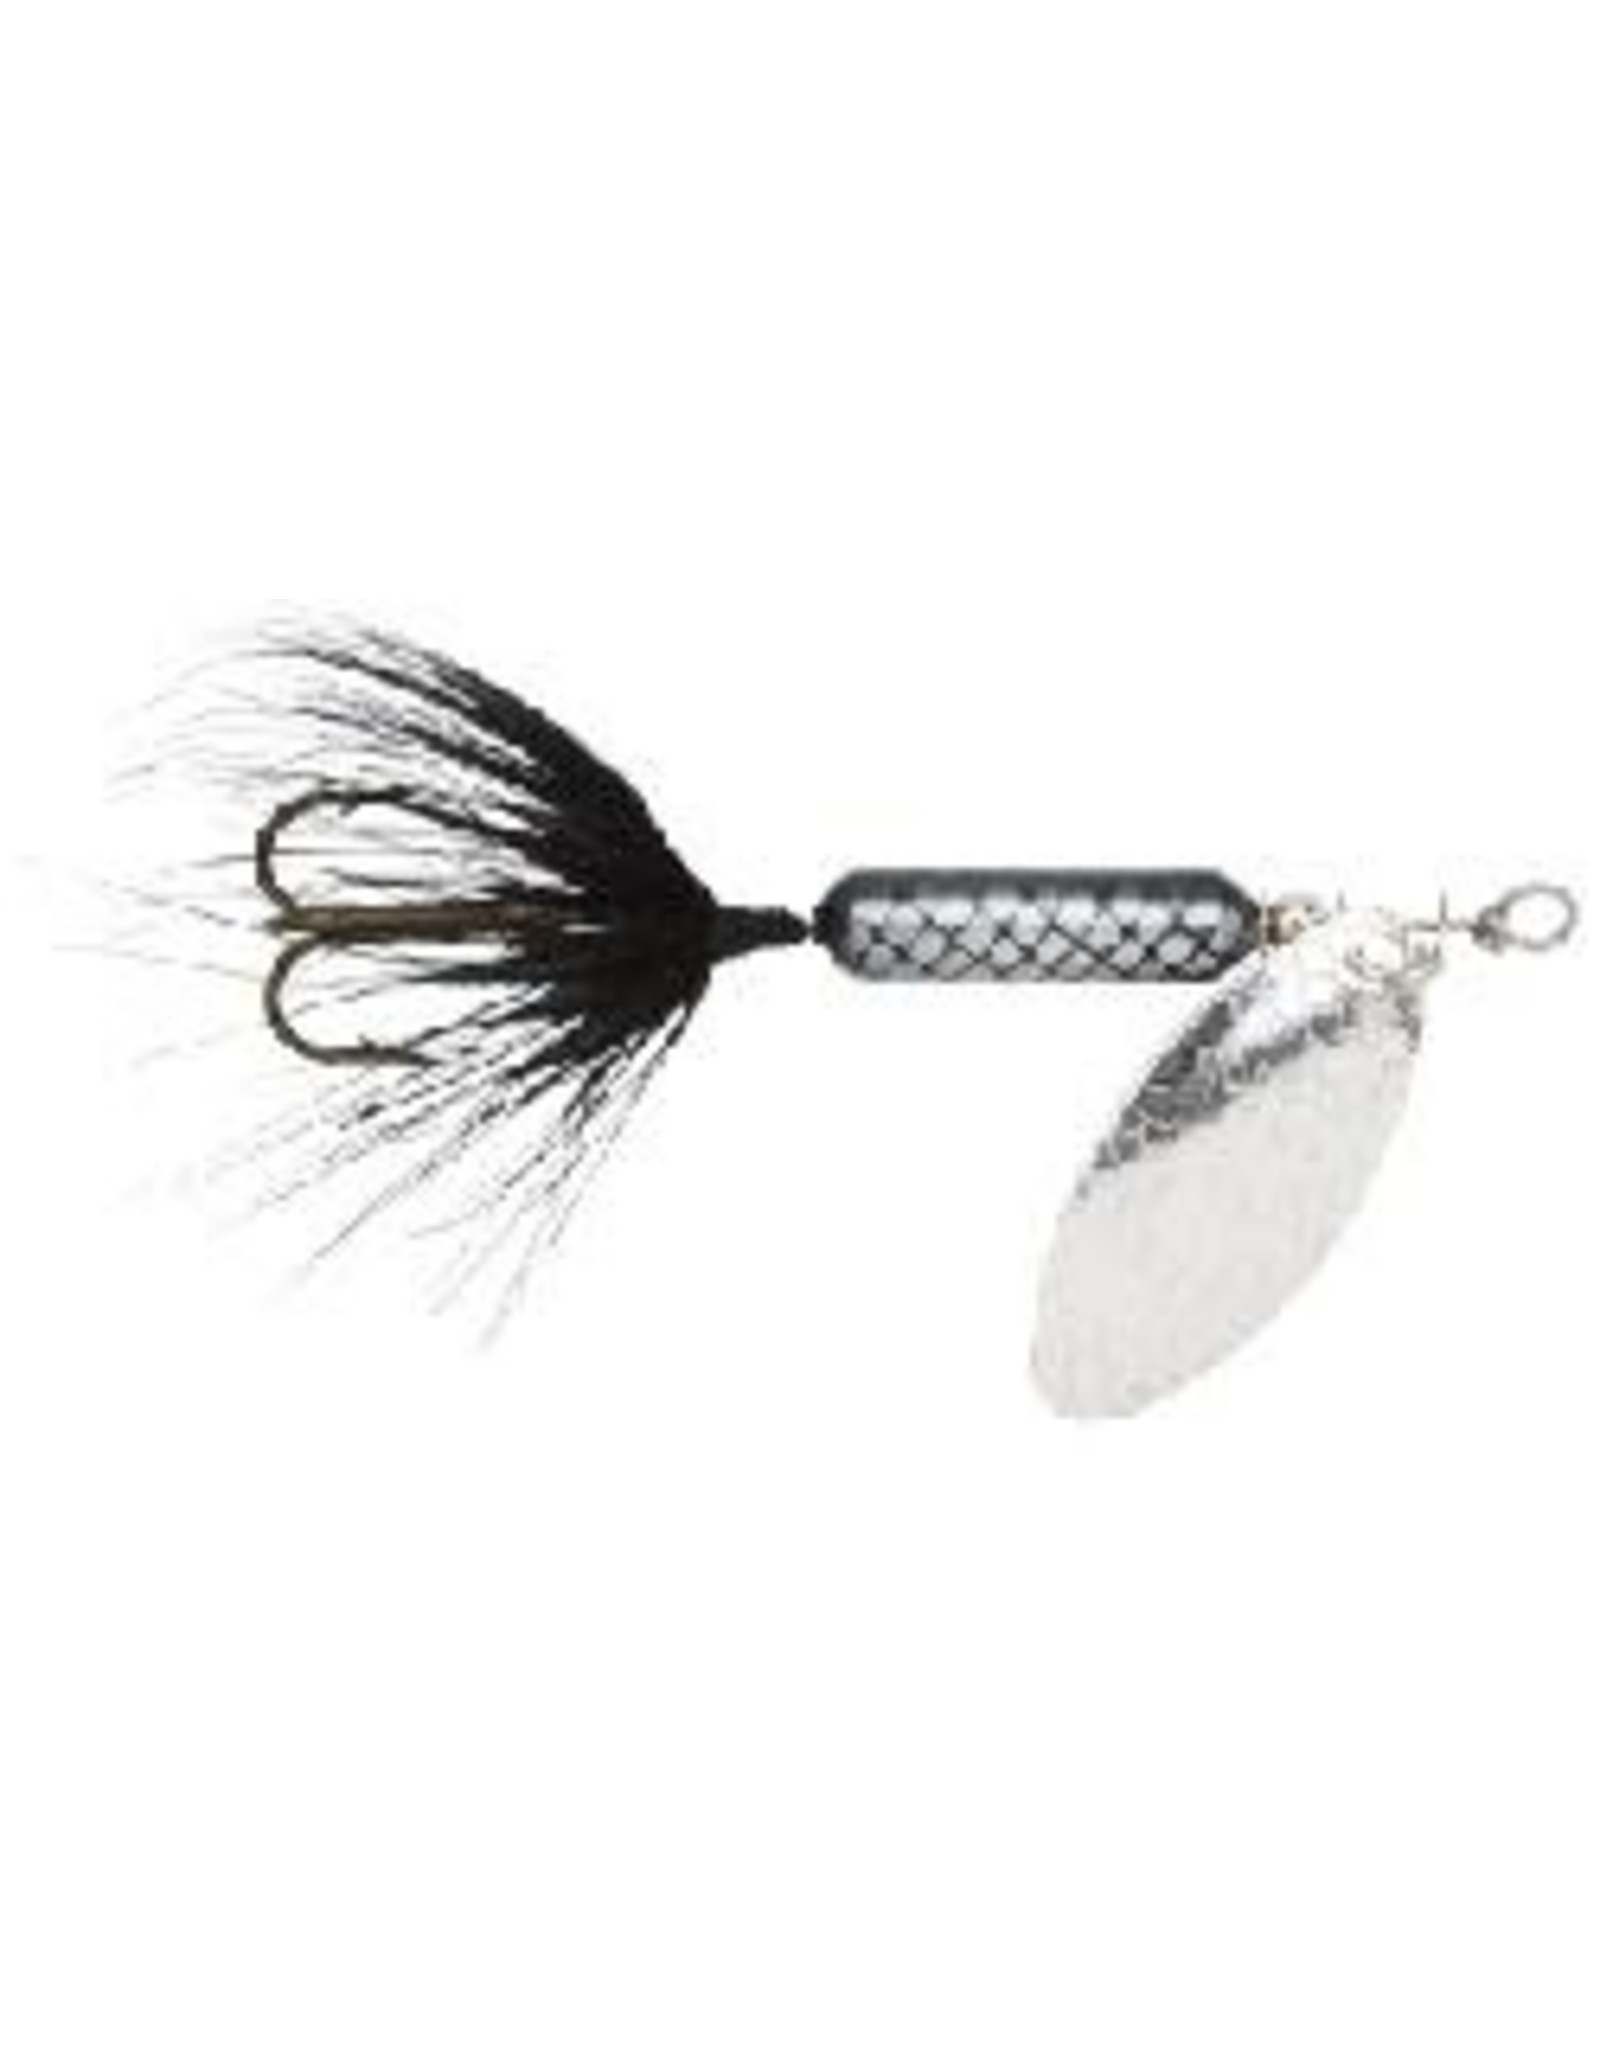 Worden's Rooster Tail 1/8 Oz. - 208 - Black